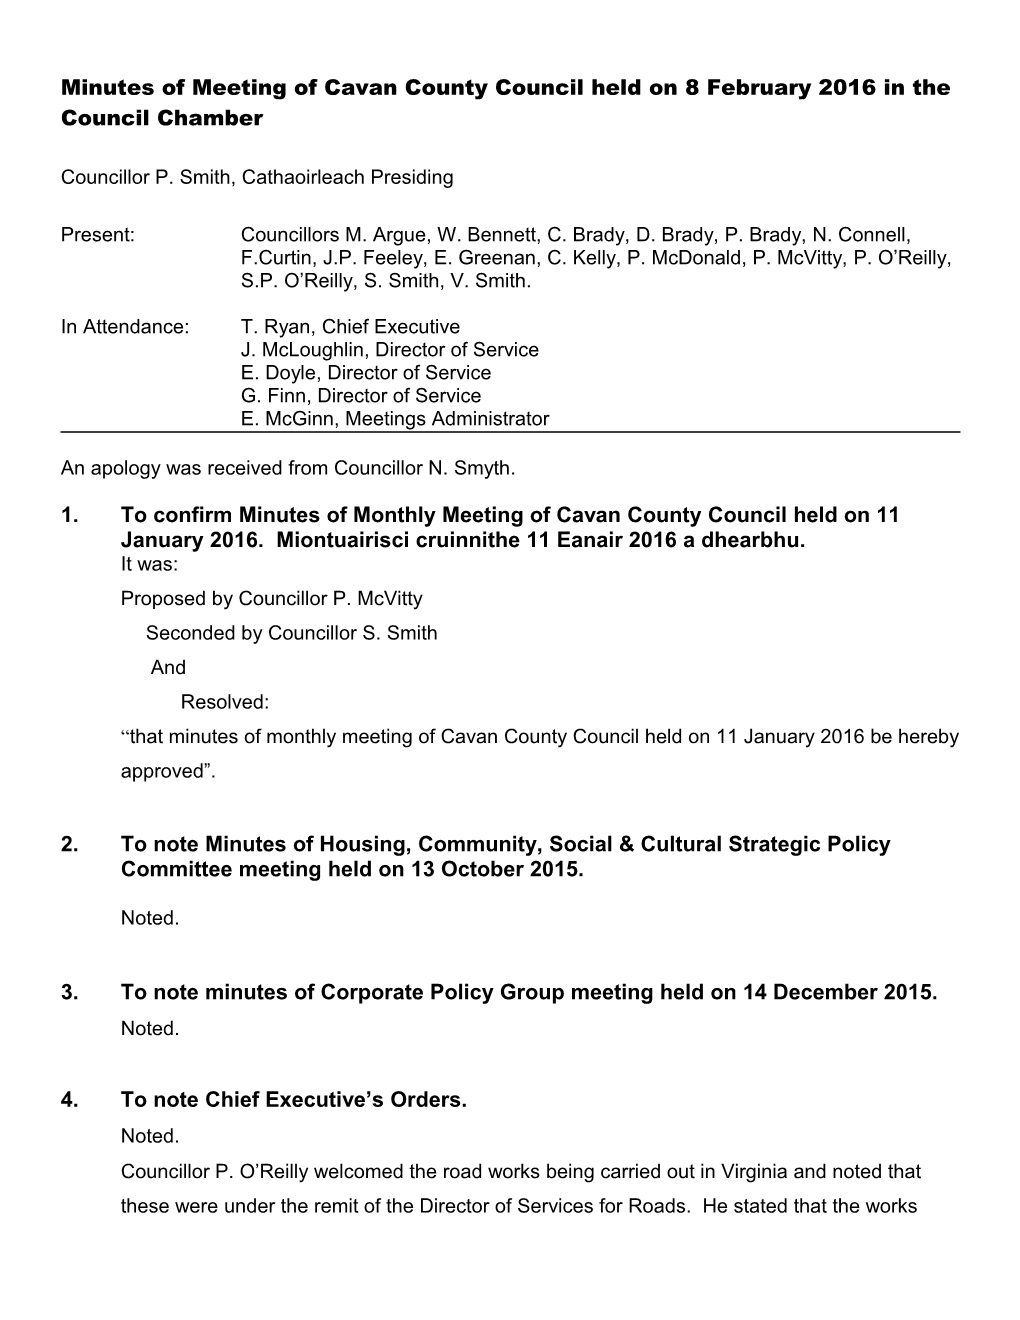 Minutes of Council Meeting Held on 11Th October 2010